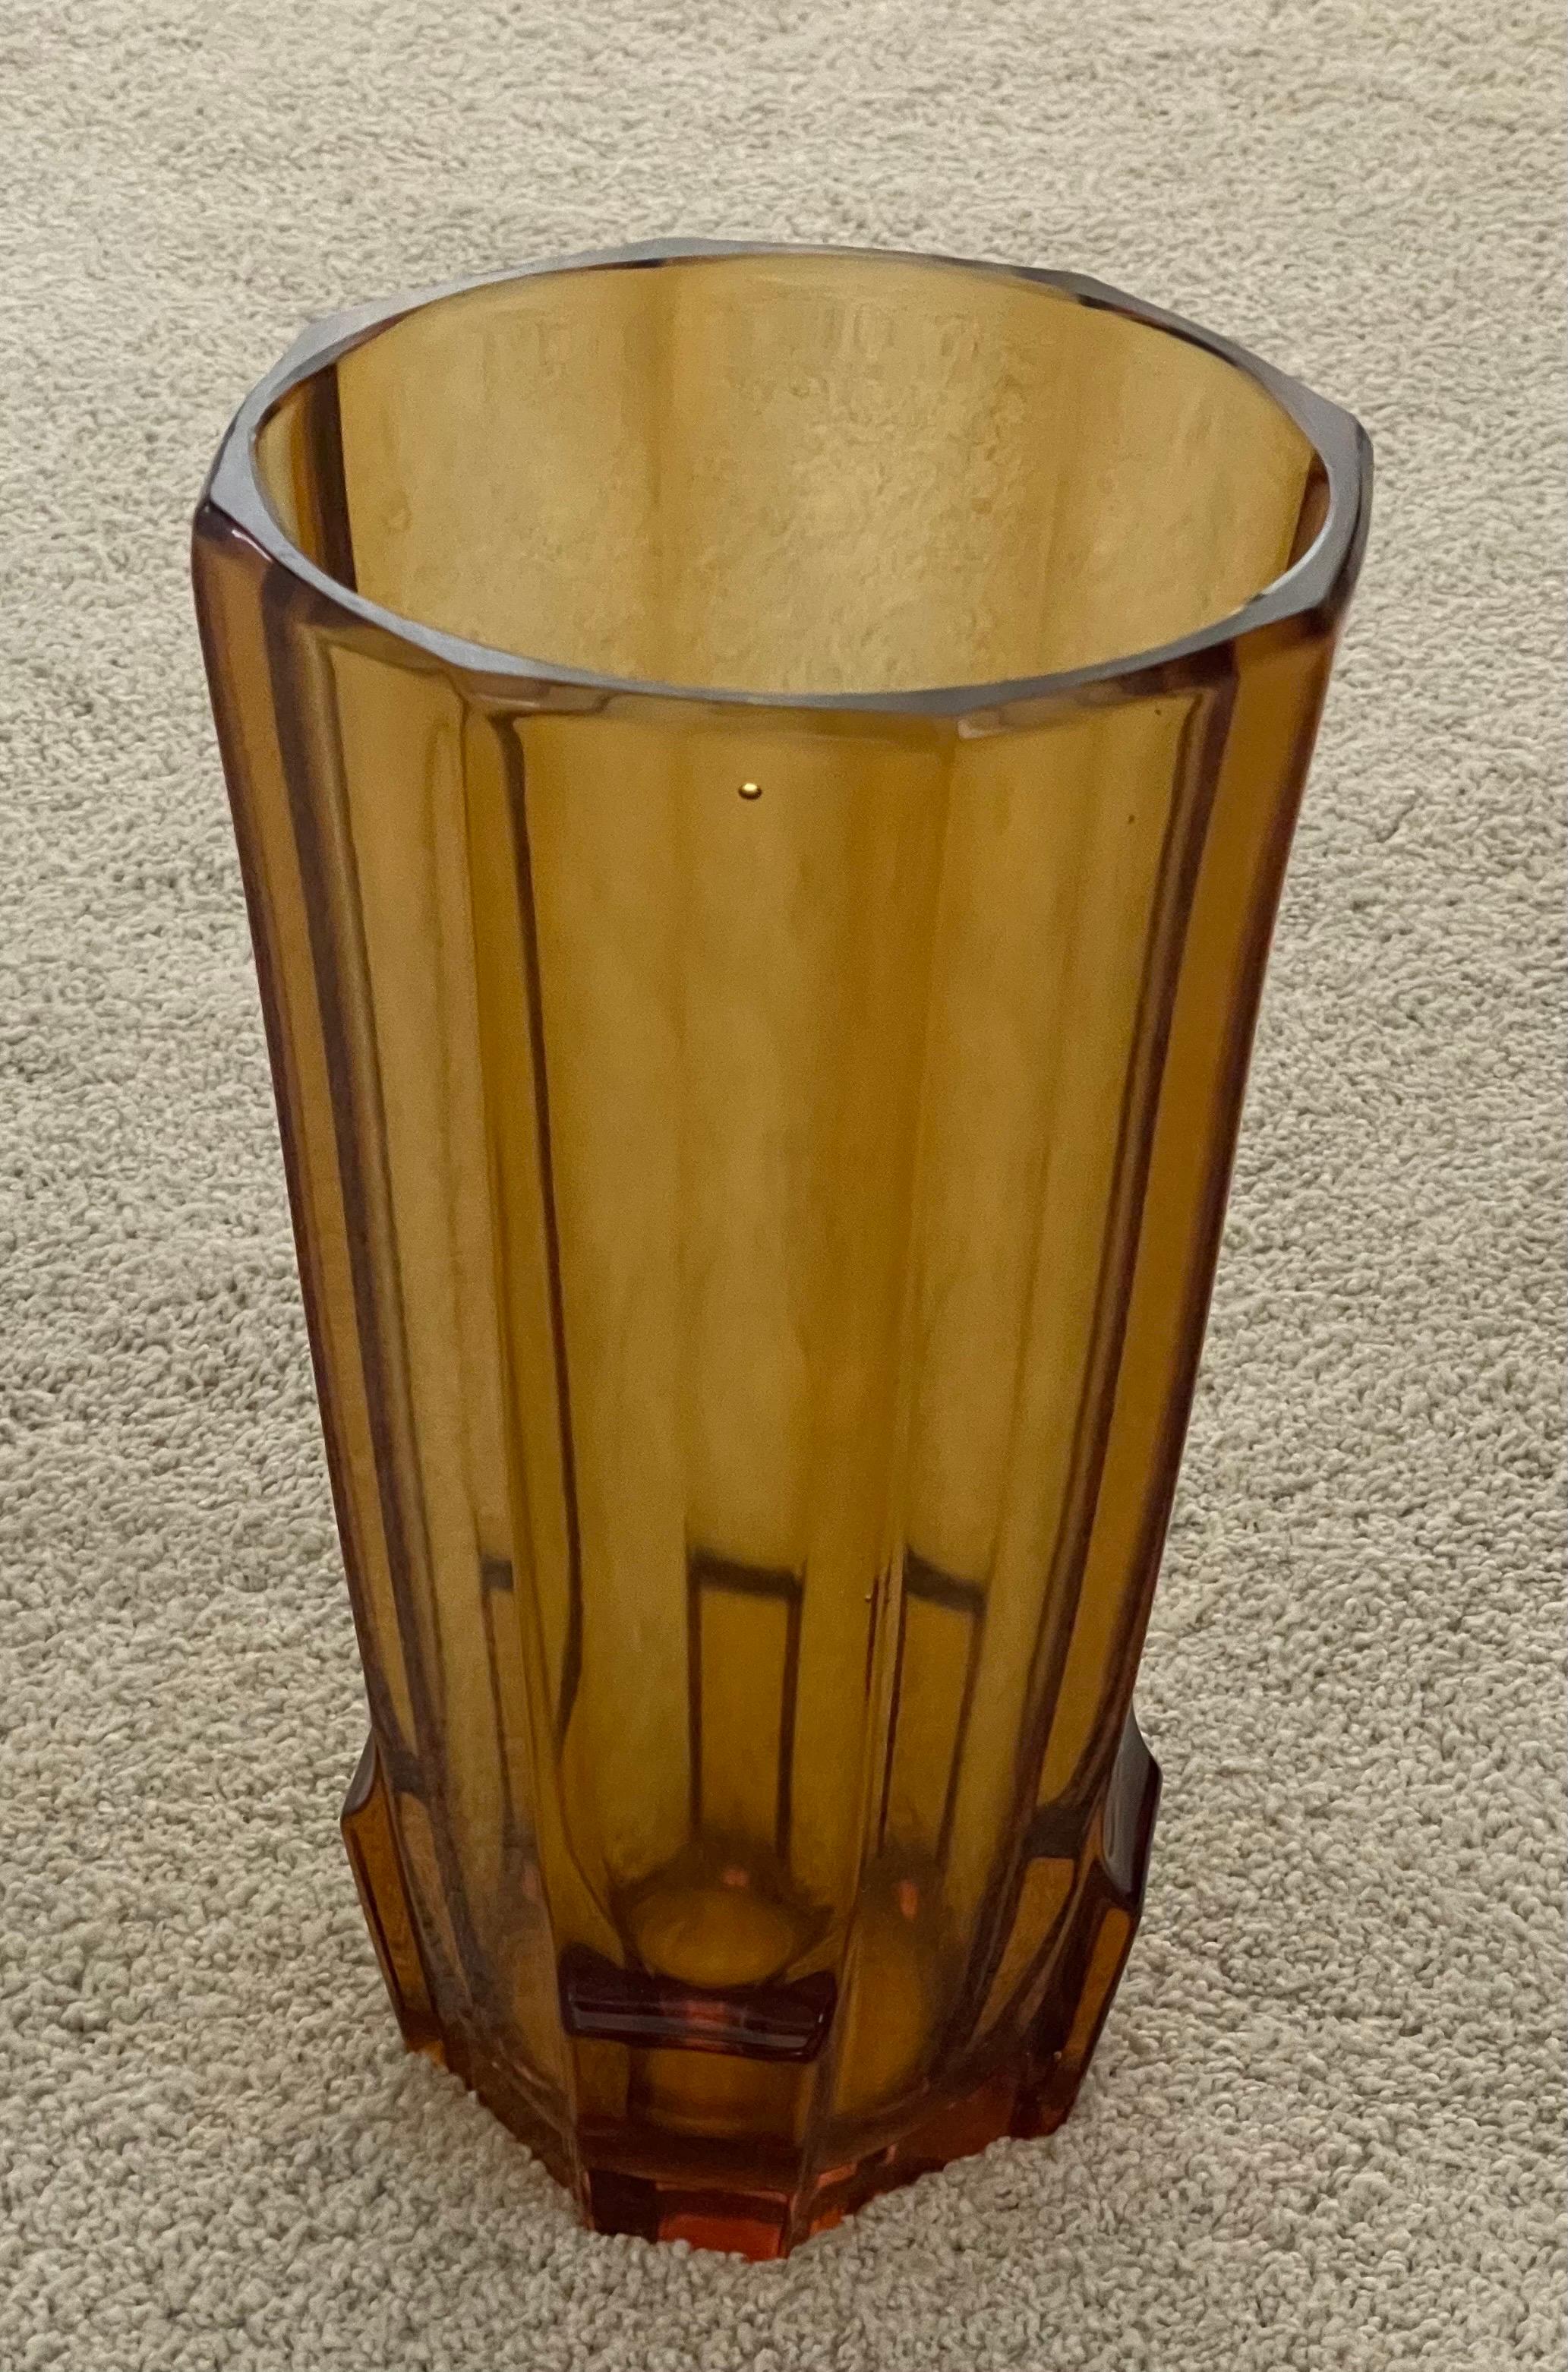 Hand-Crafted Large Art Deco Art Glass Faceted Vase by Josef Hoffmann for Moser Glassworks For Sale